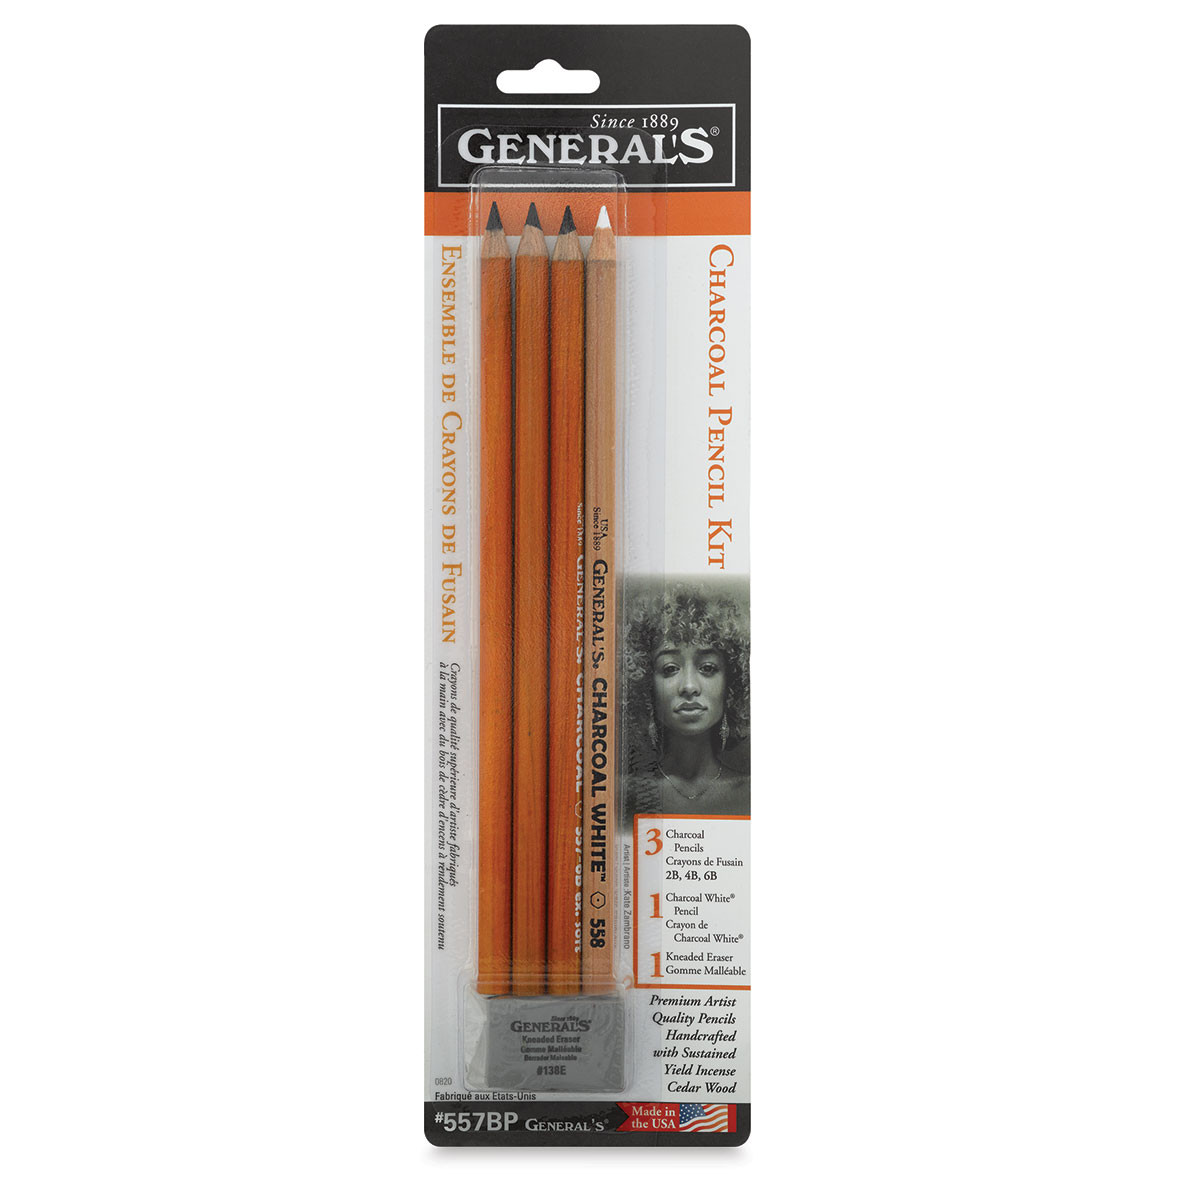 General's Charcoal Pencils and Sets